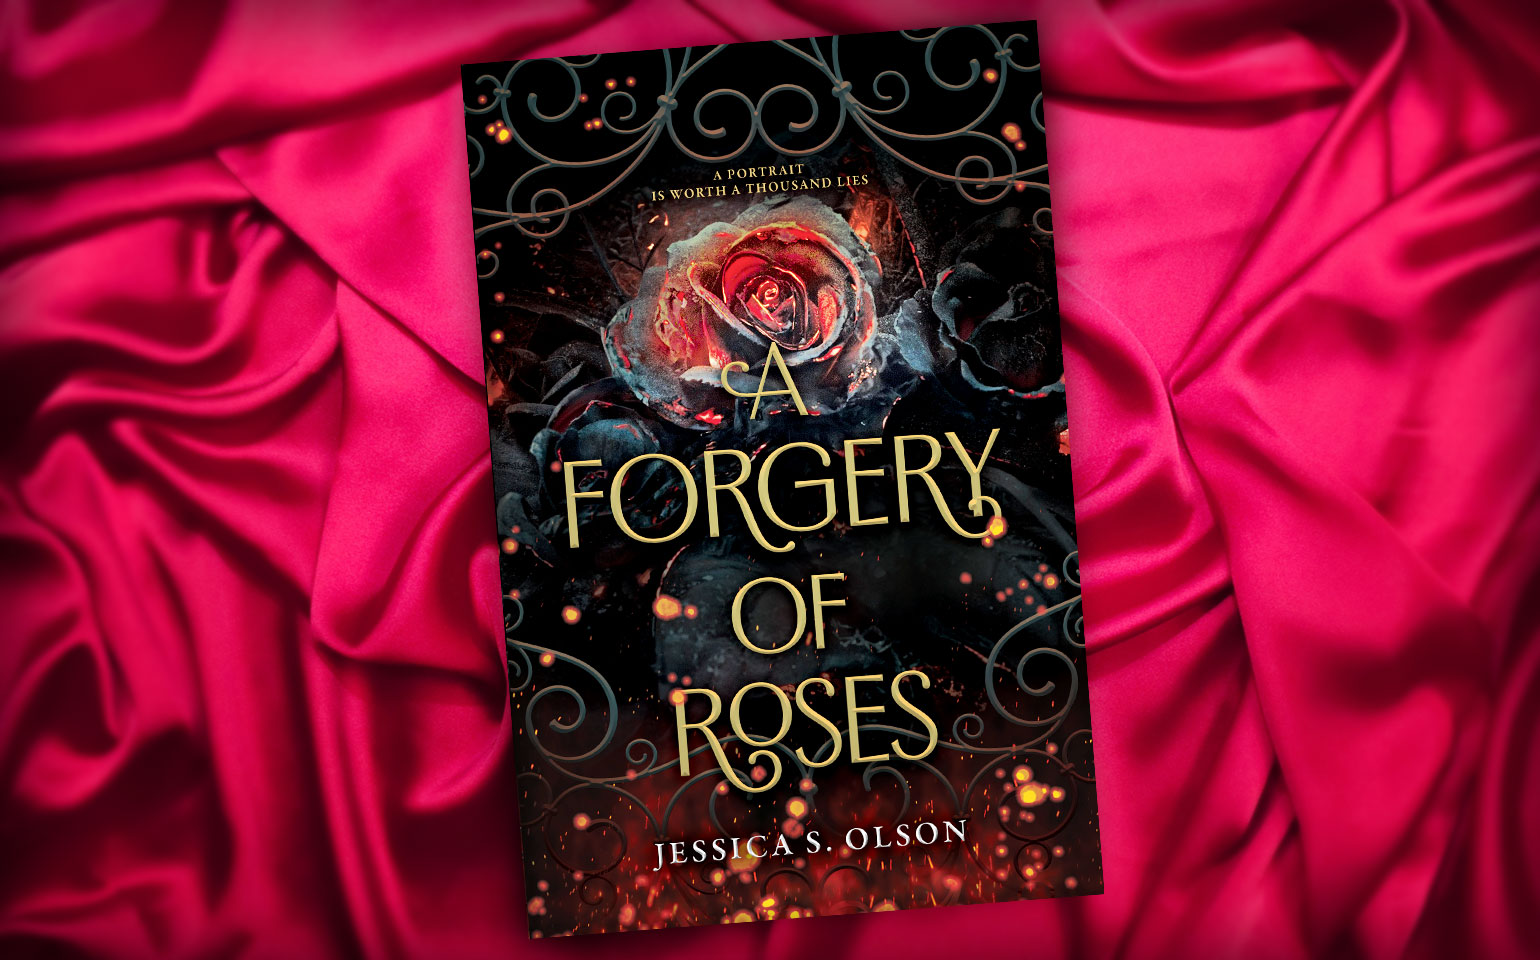 a forgery of roses series